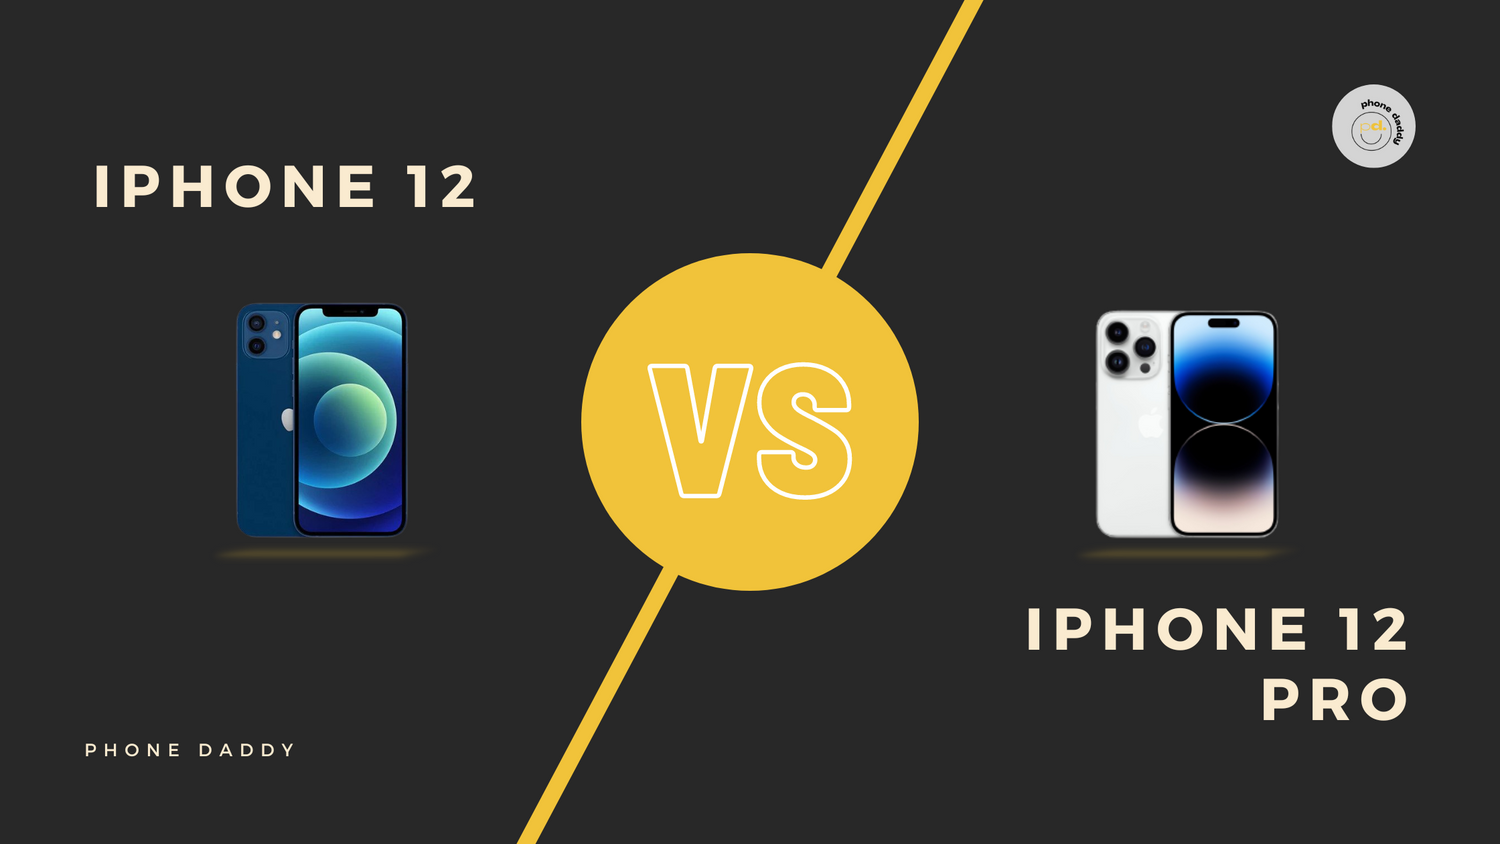 What's the Difference between iPhone 12 and iPhone 12 Pro?